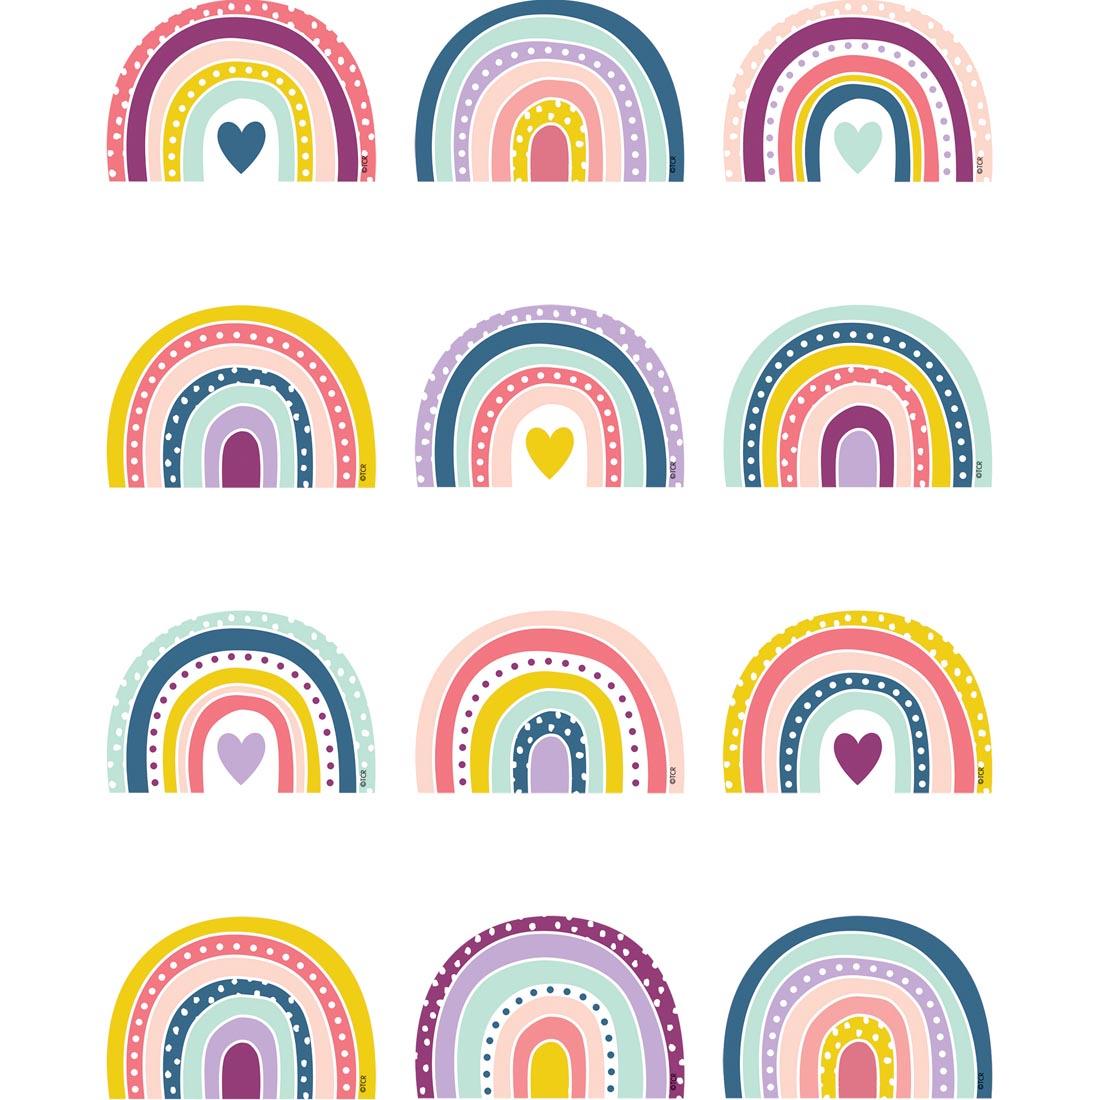 Rainbows Mini Accents from the Oh Happy Day collection by Teacher Created Resources